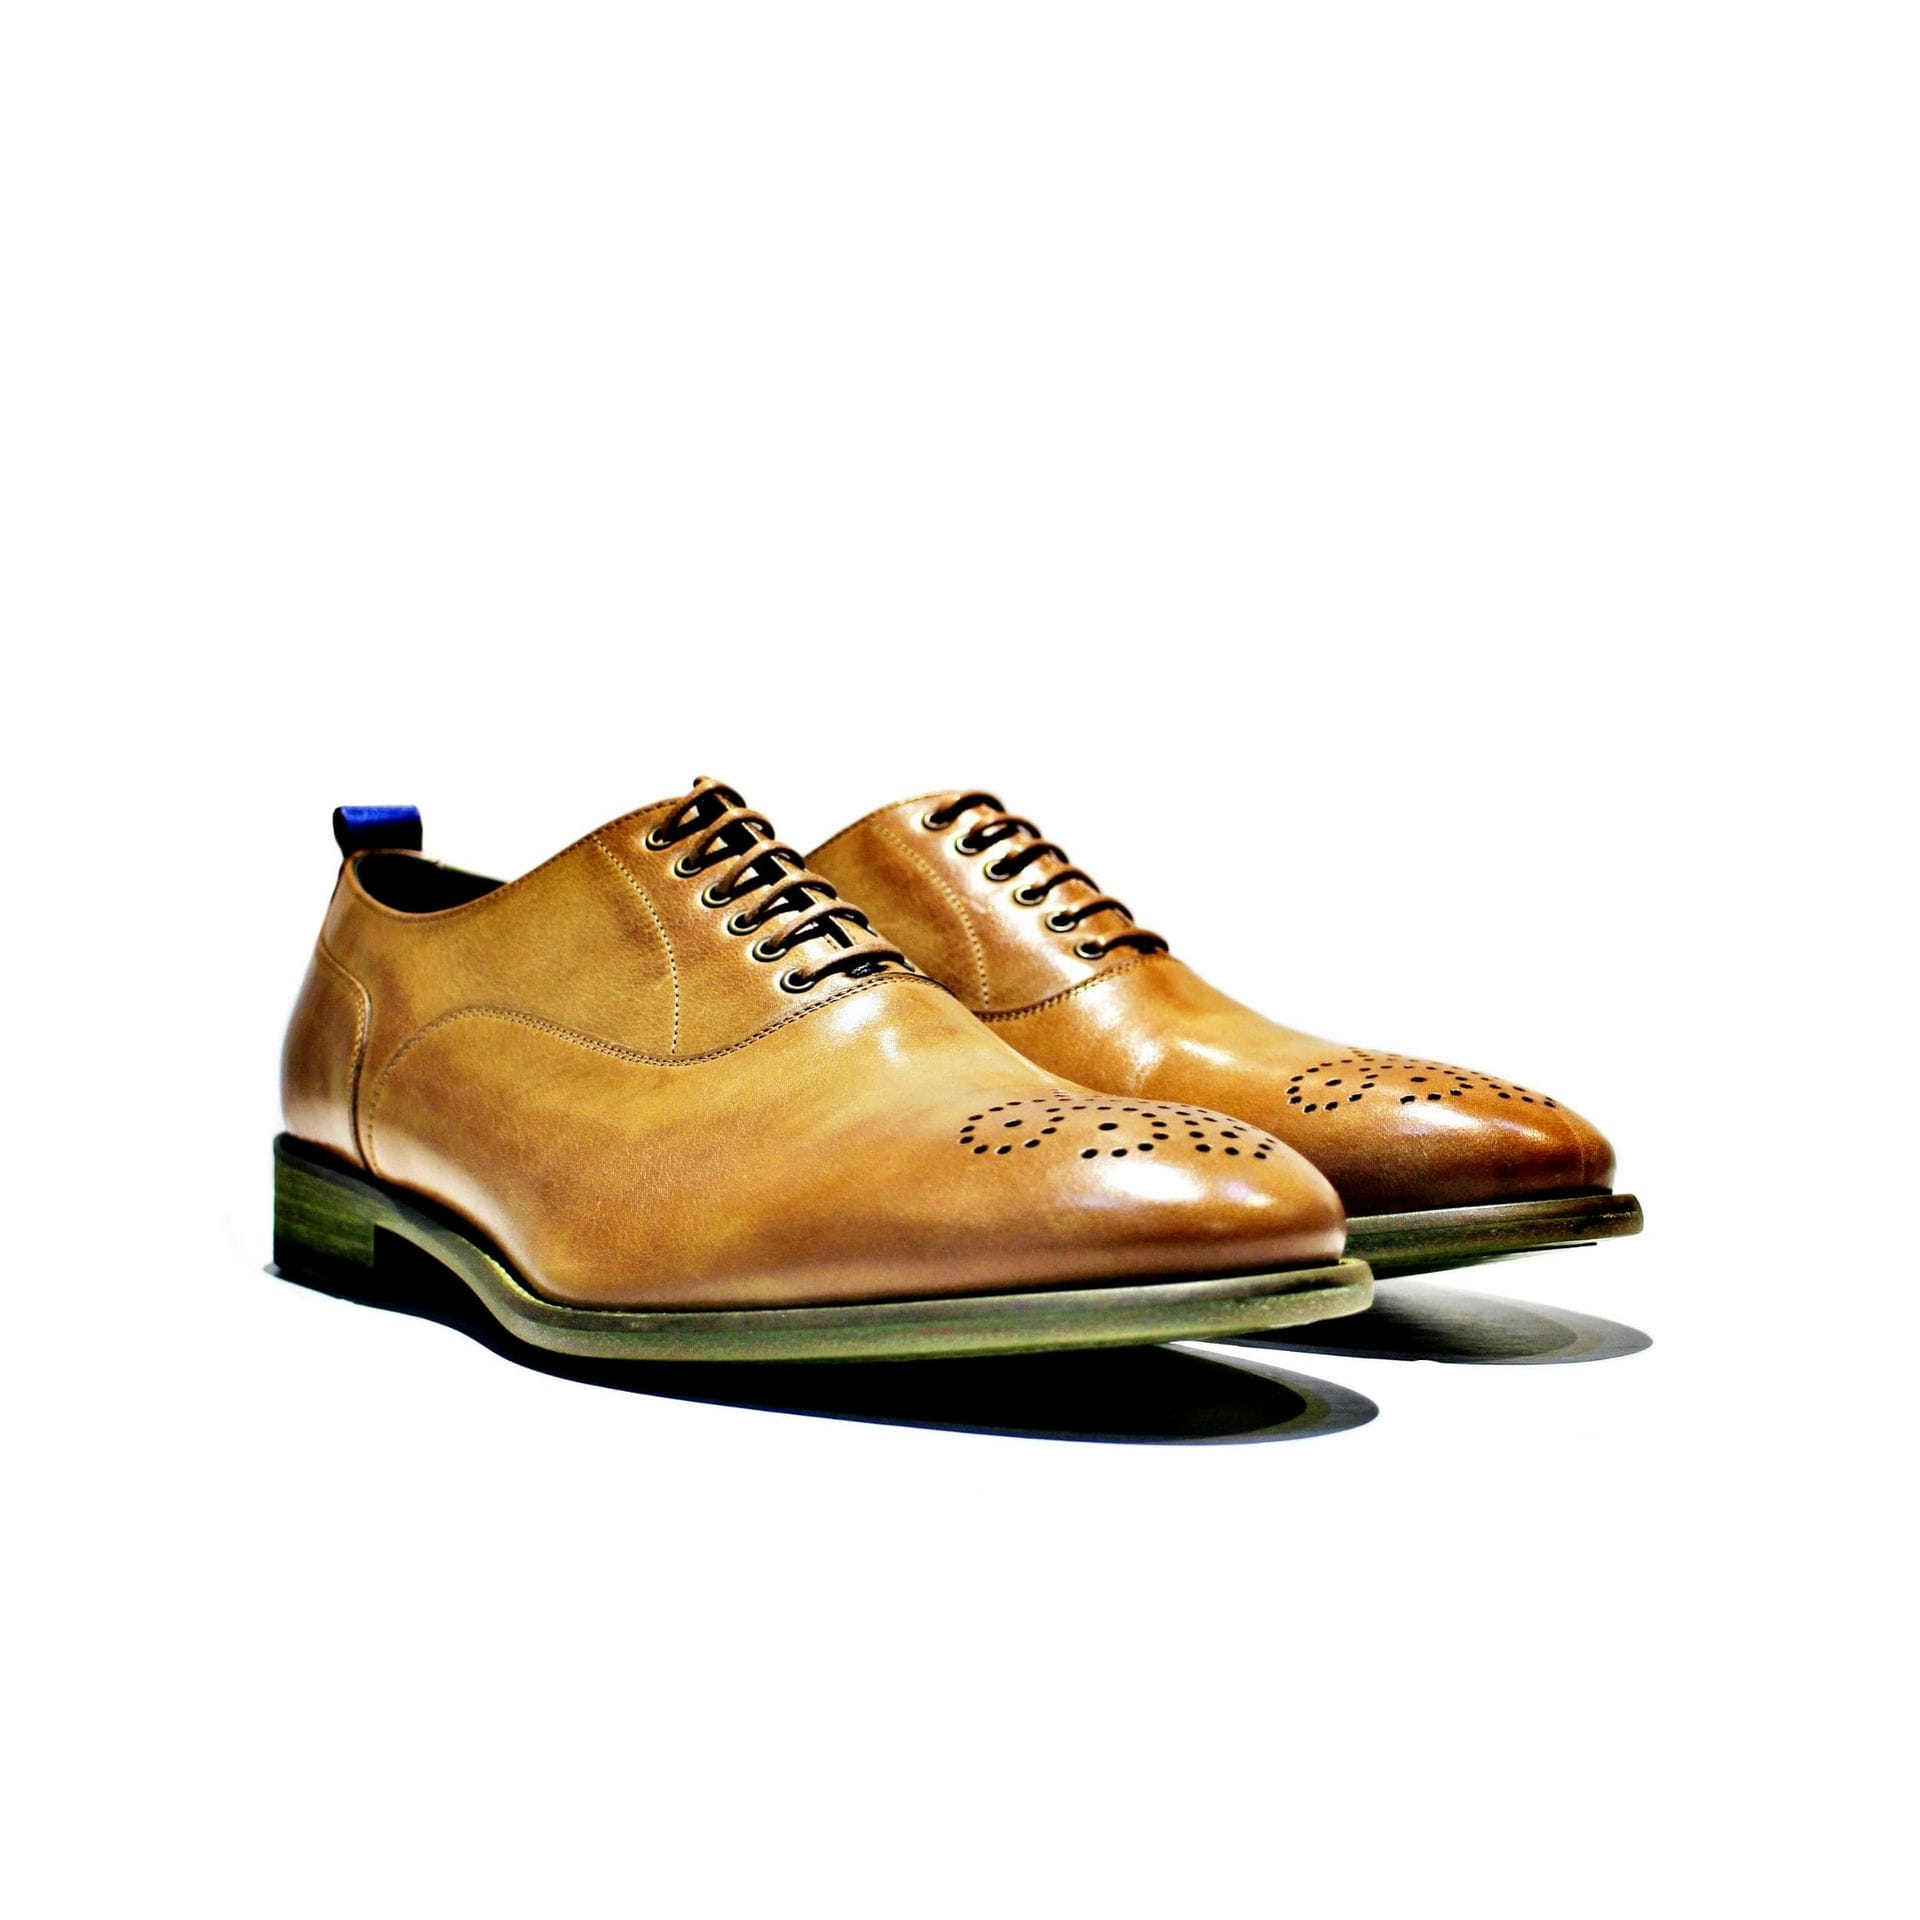 Shoe all composed of leather, interior, outer and sole. Handmade in Portugal “walk with pintta”